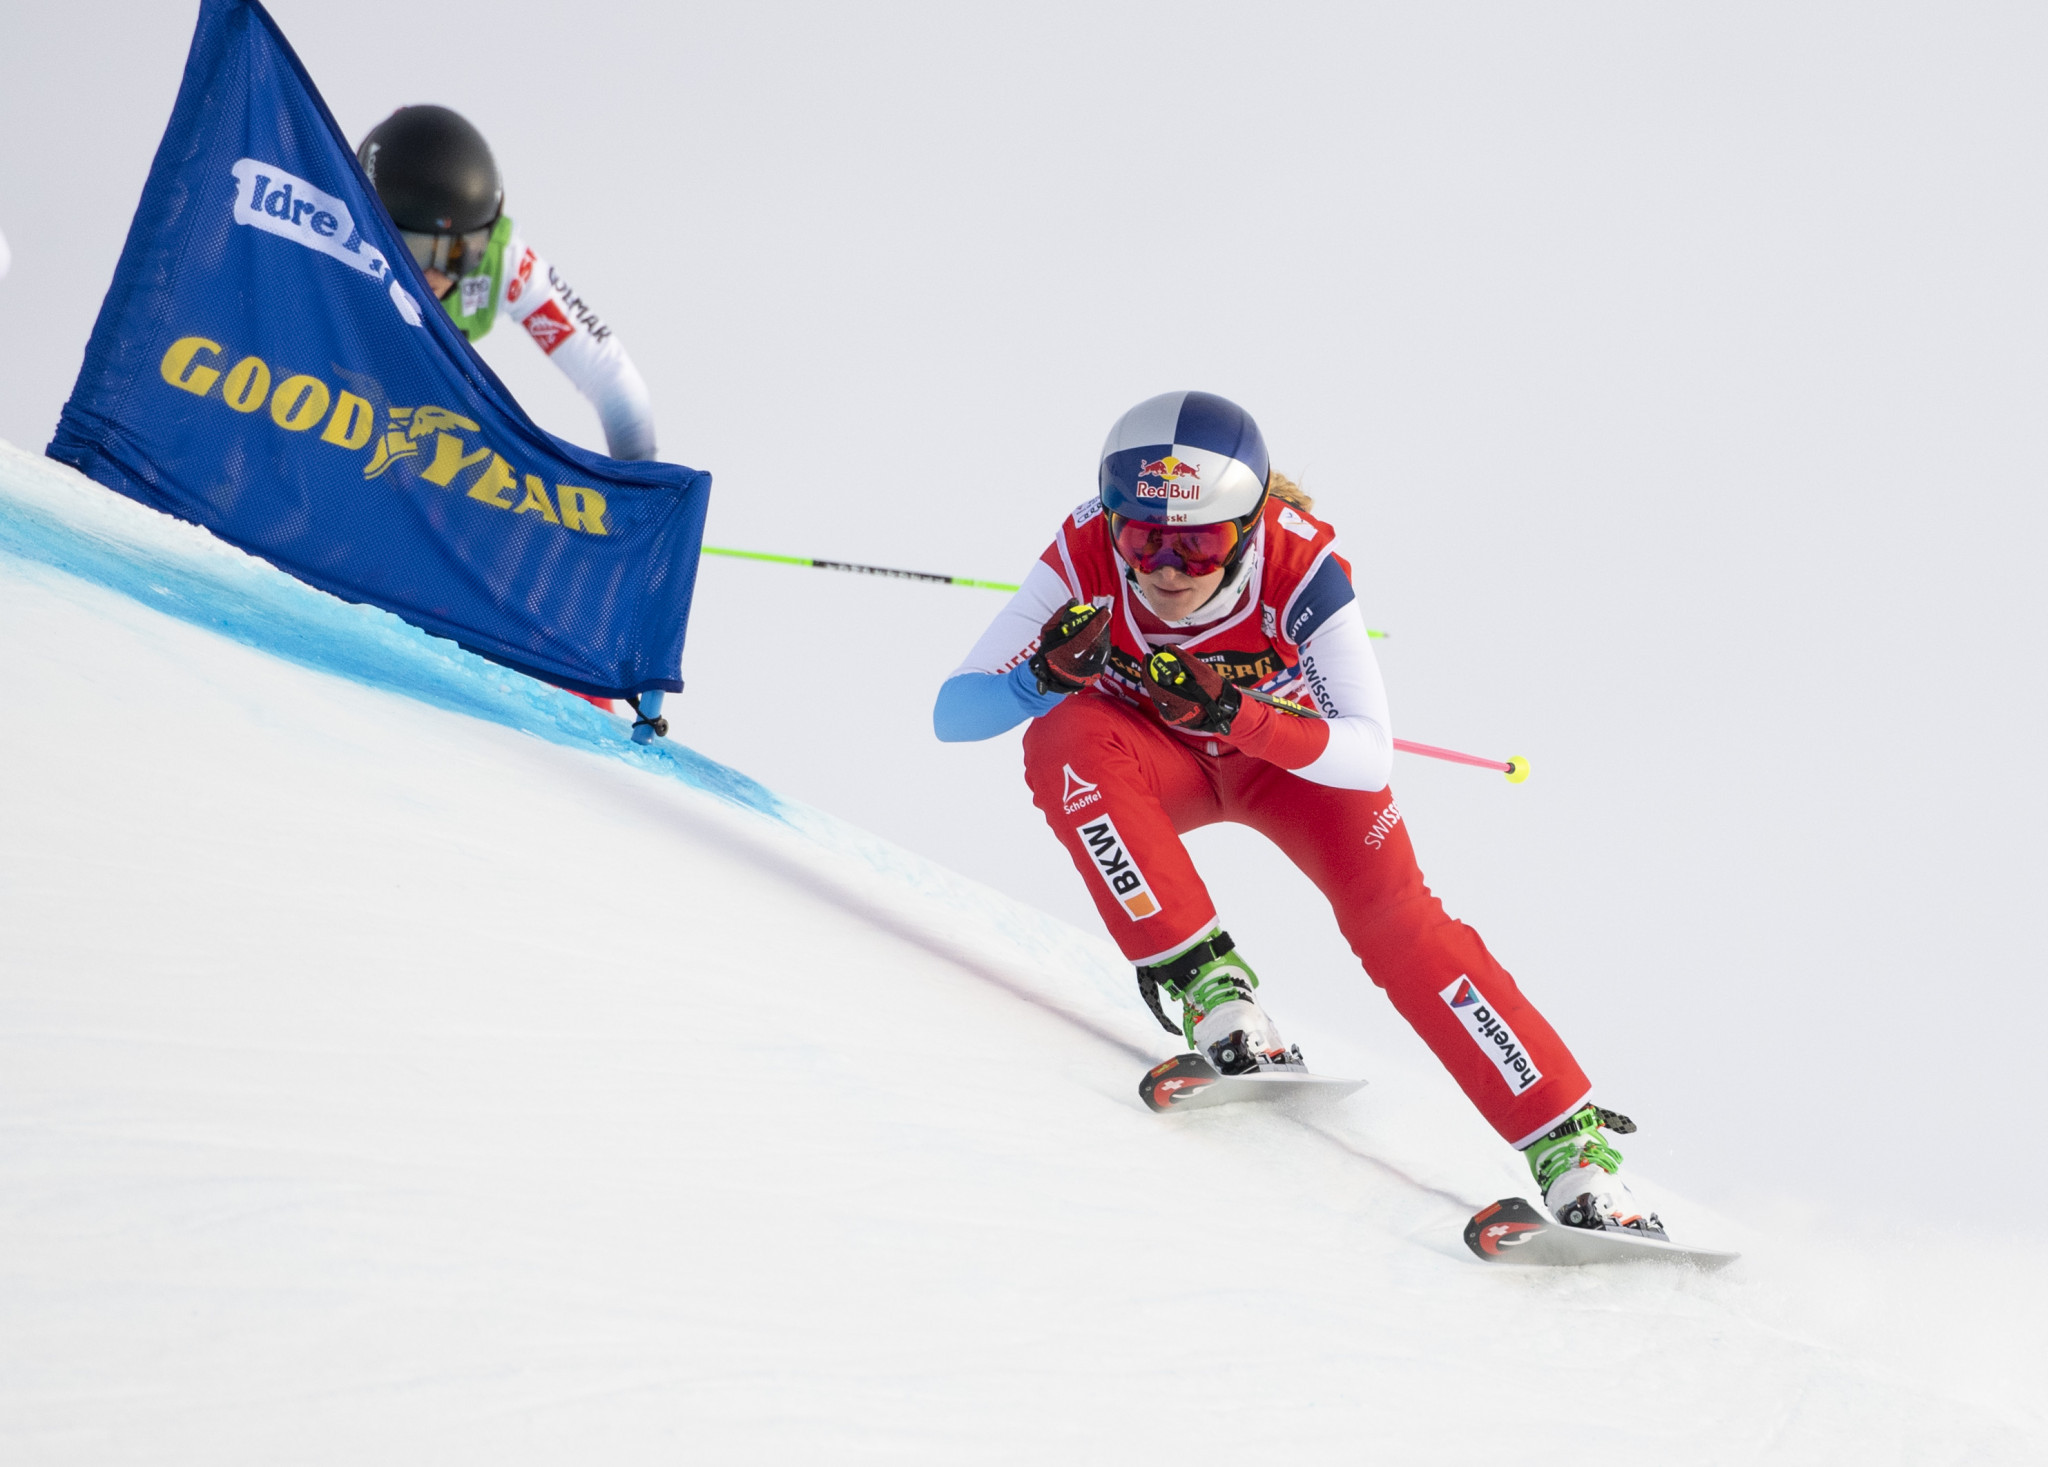 Smith triumphs again in Sunny Valley to boost FIS Ski Cross World Cup hopes